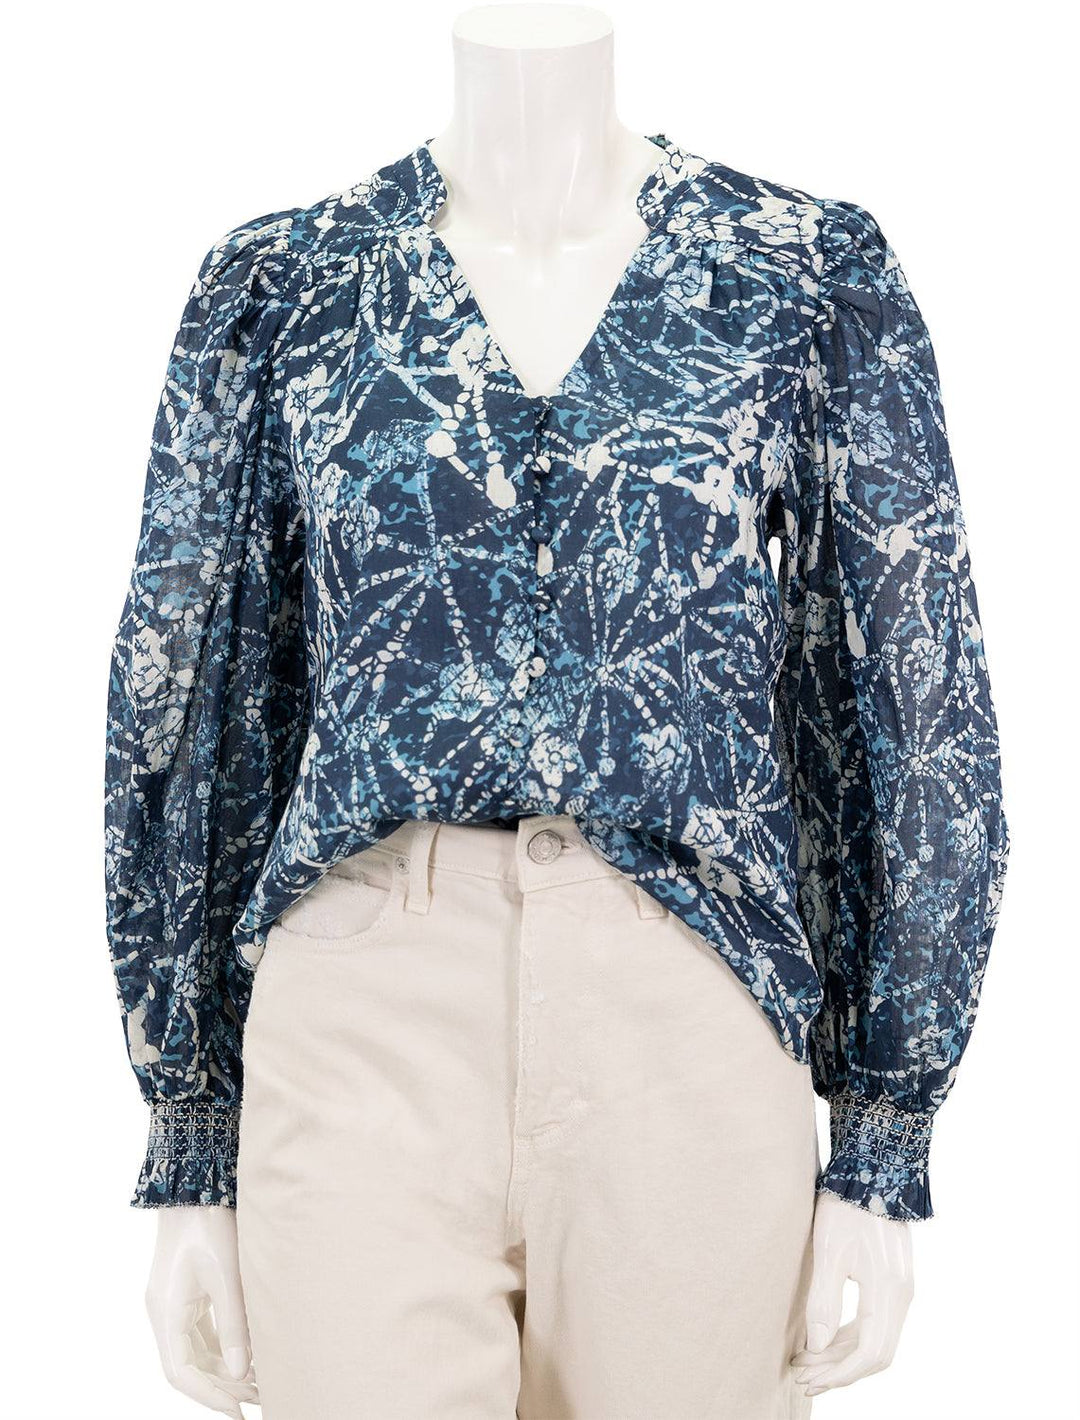 Front view of Marie Oliver's imogen blouse in Batik Floral.